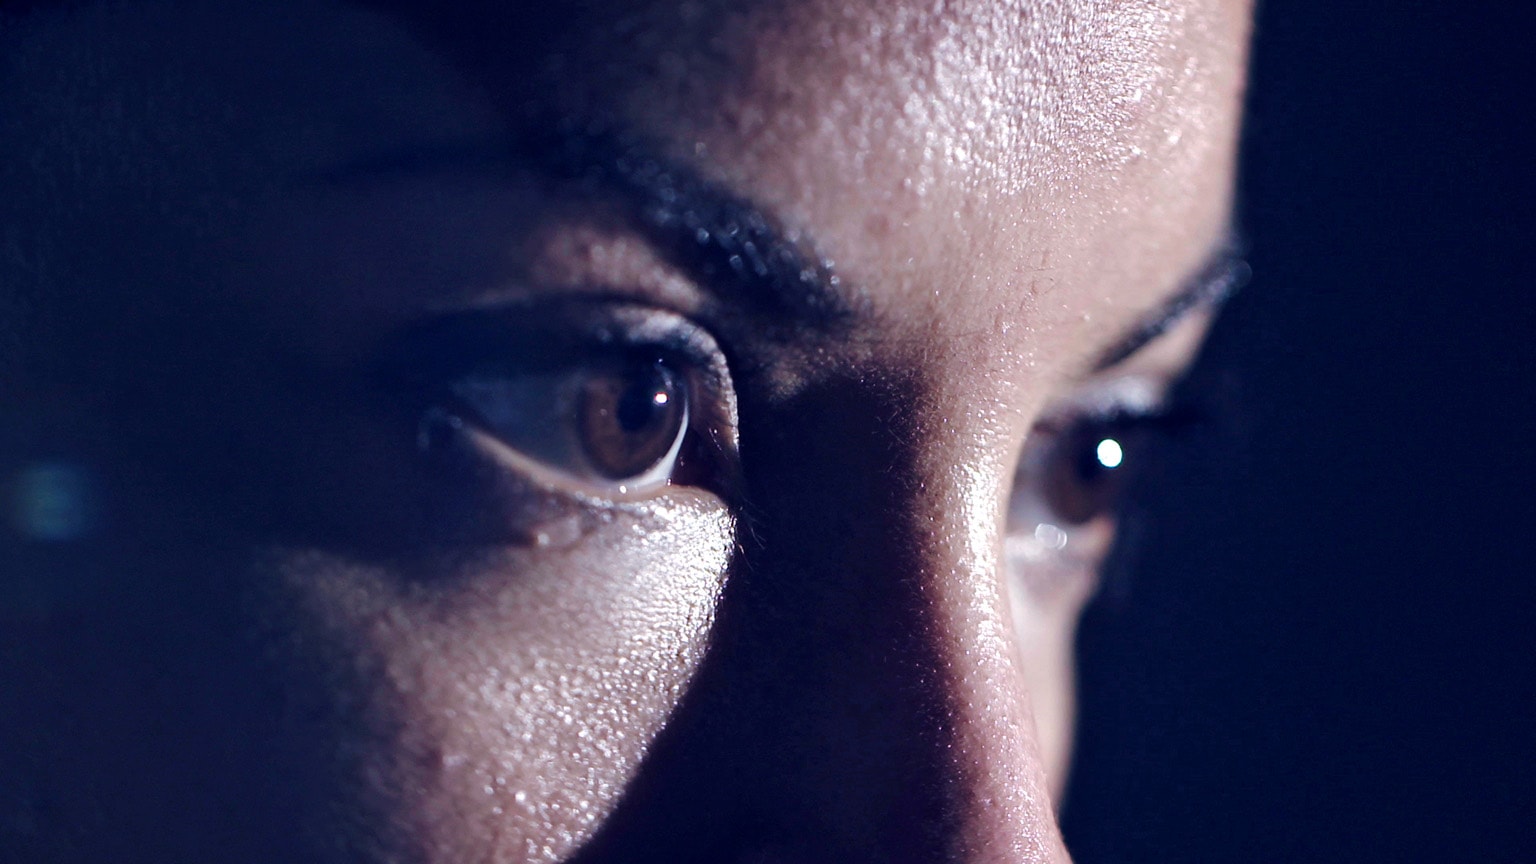 Close-up image of intensely focused eyes with some perspiration on the face.